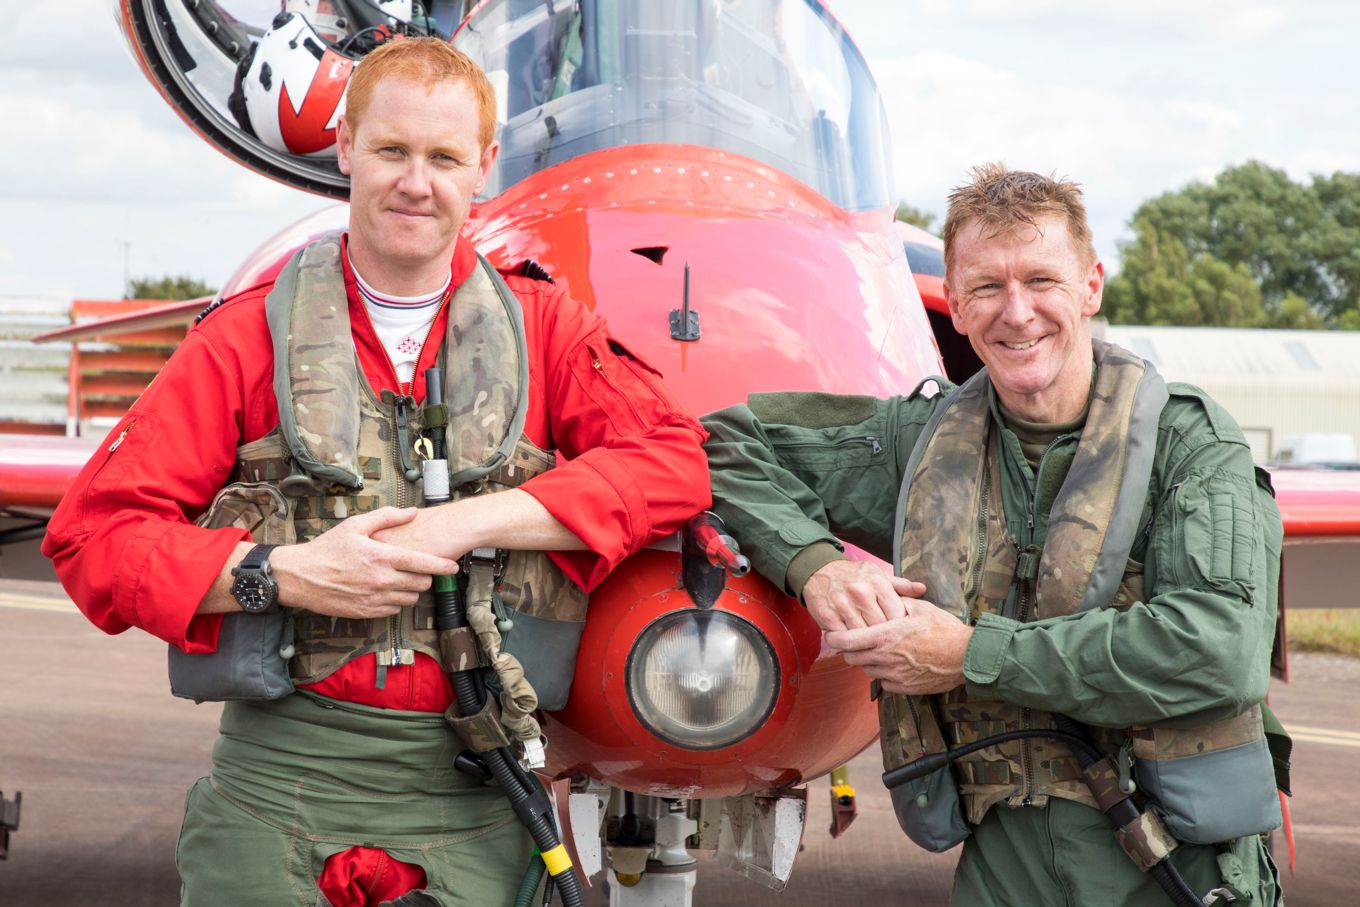 Red 1, Squadron Leader Martin Pert, with Tim Peake